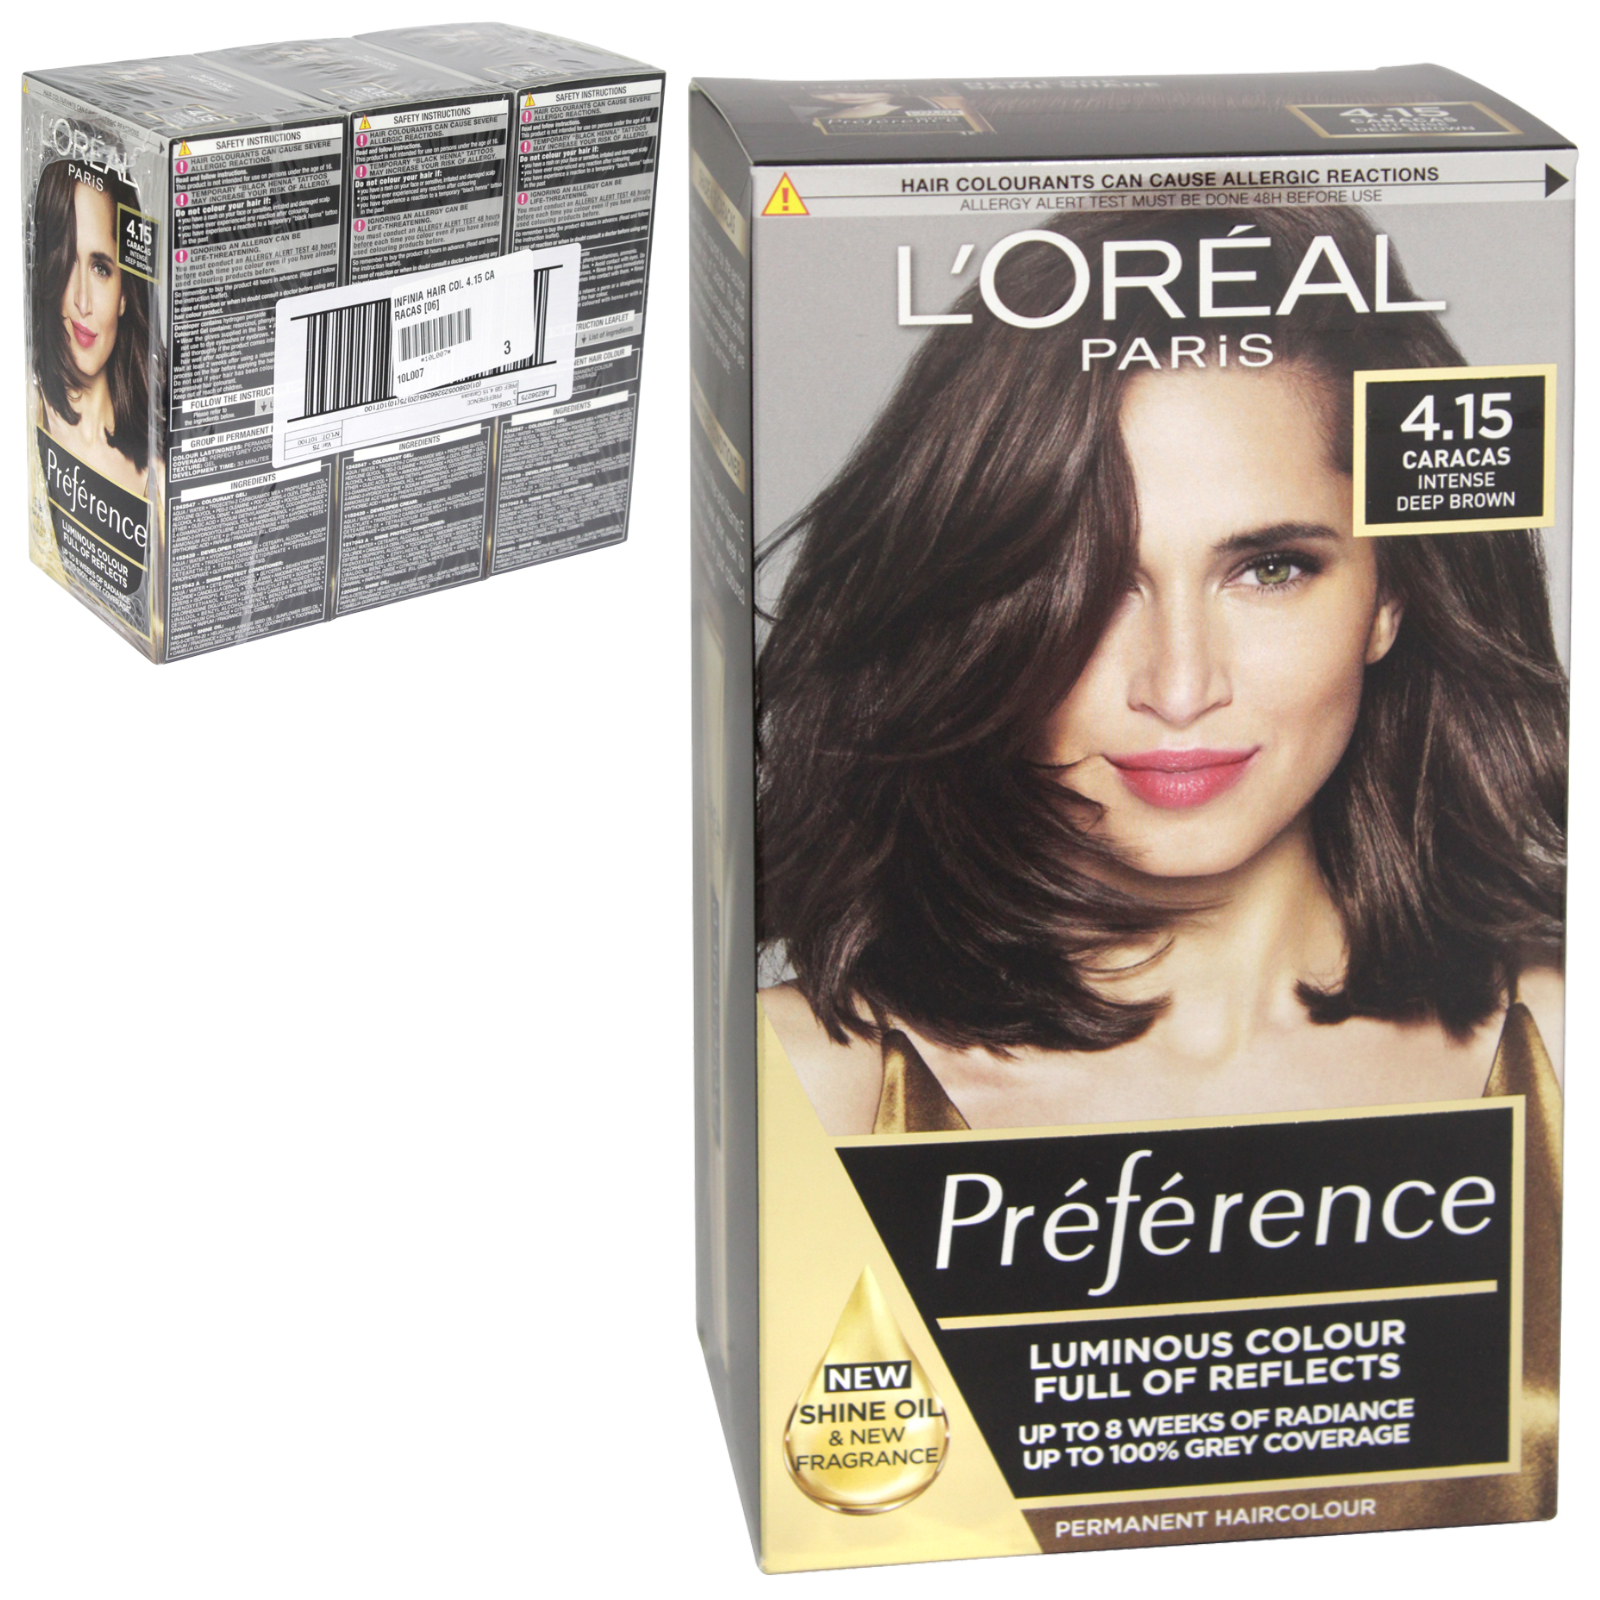 L'Oreal Preference Caracas  Intense Deep Brown Hair Colour x3 - Concord  Cash and Carry